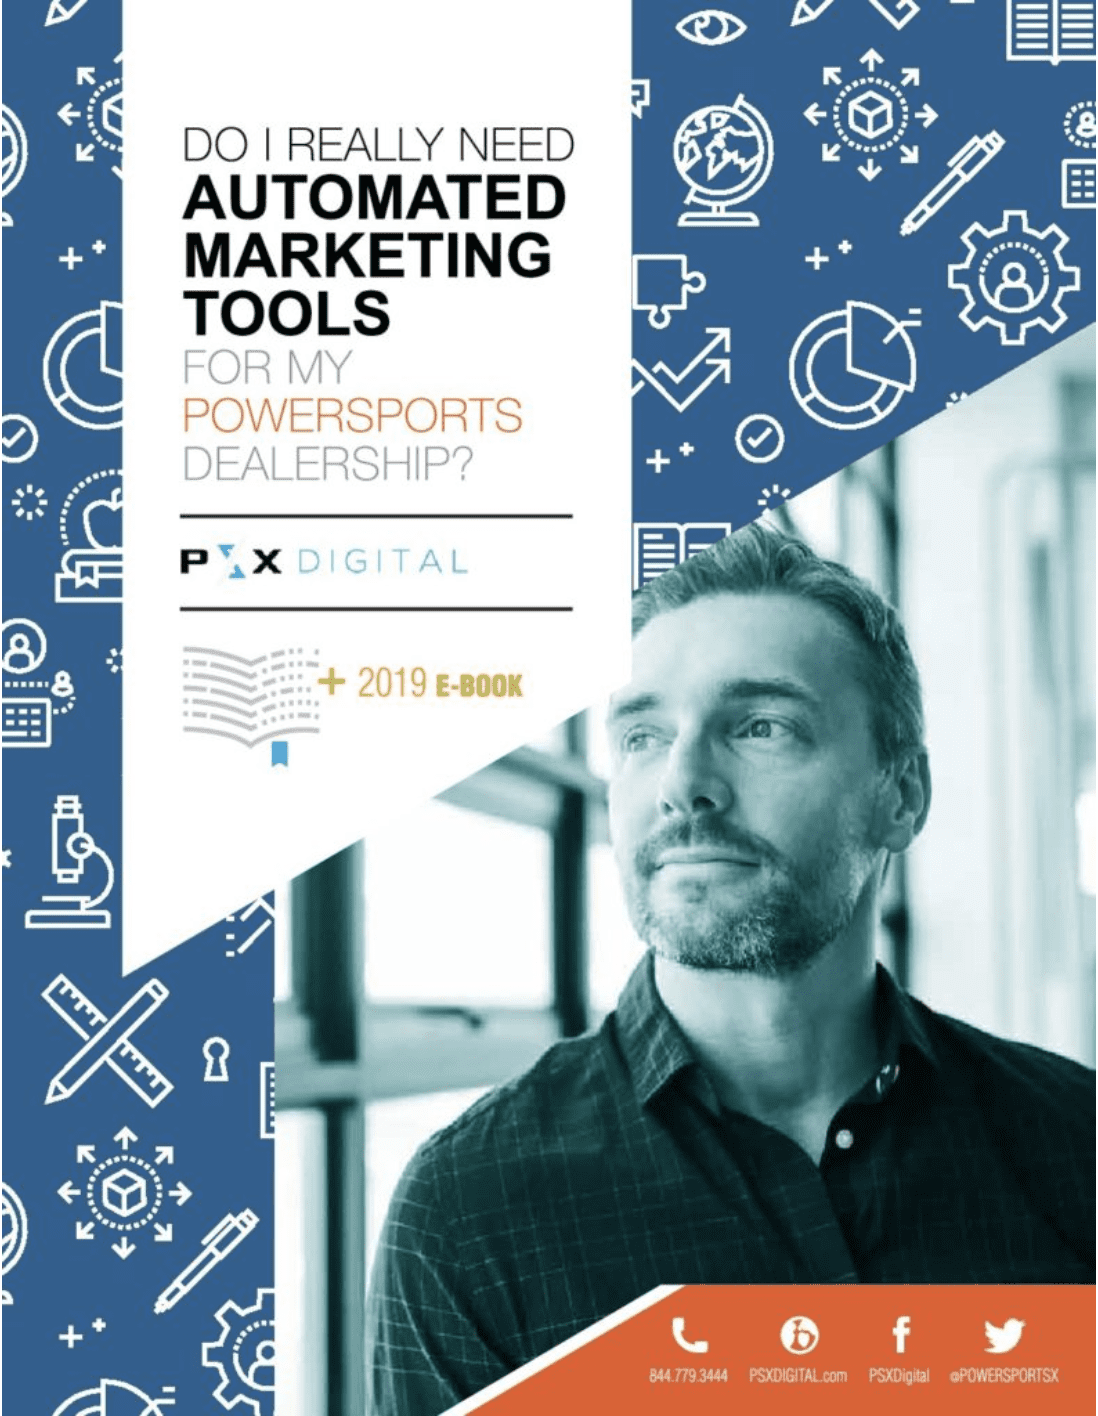 eBook1 - Automated Marketing Tools PNG